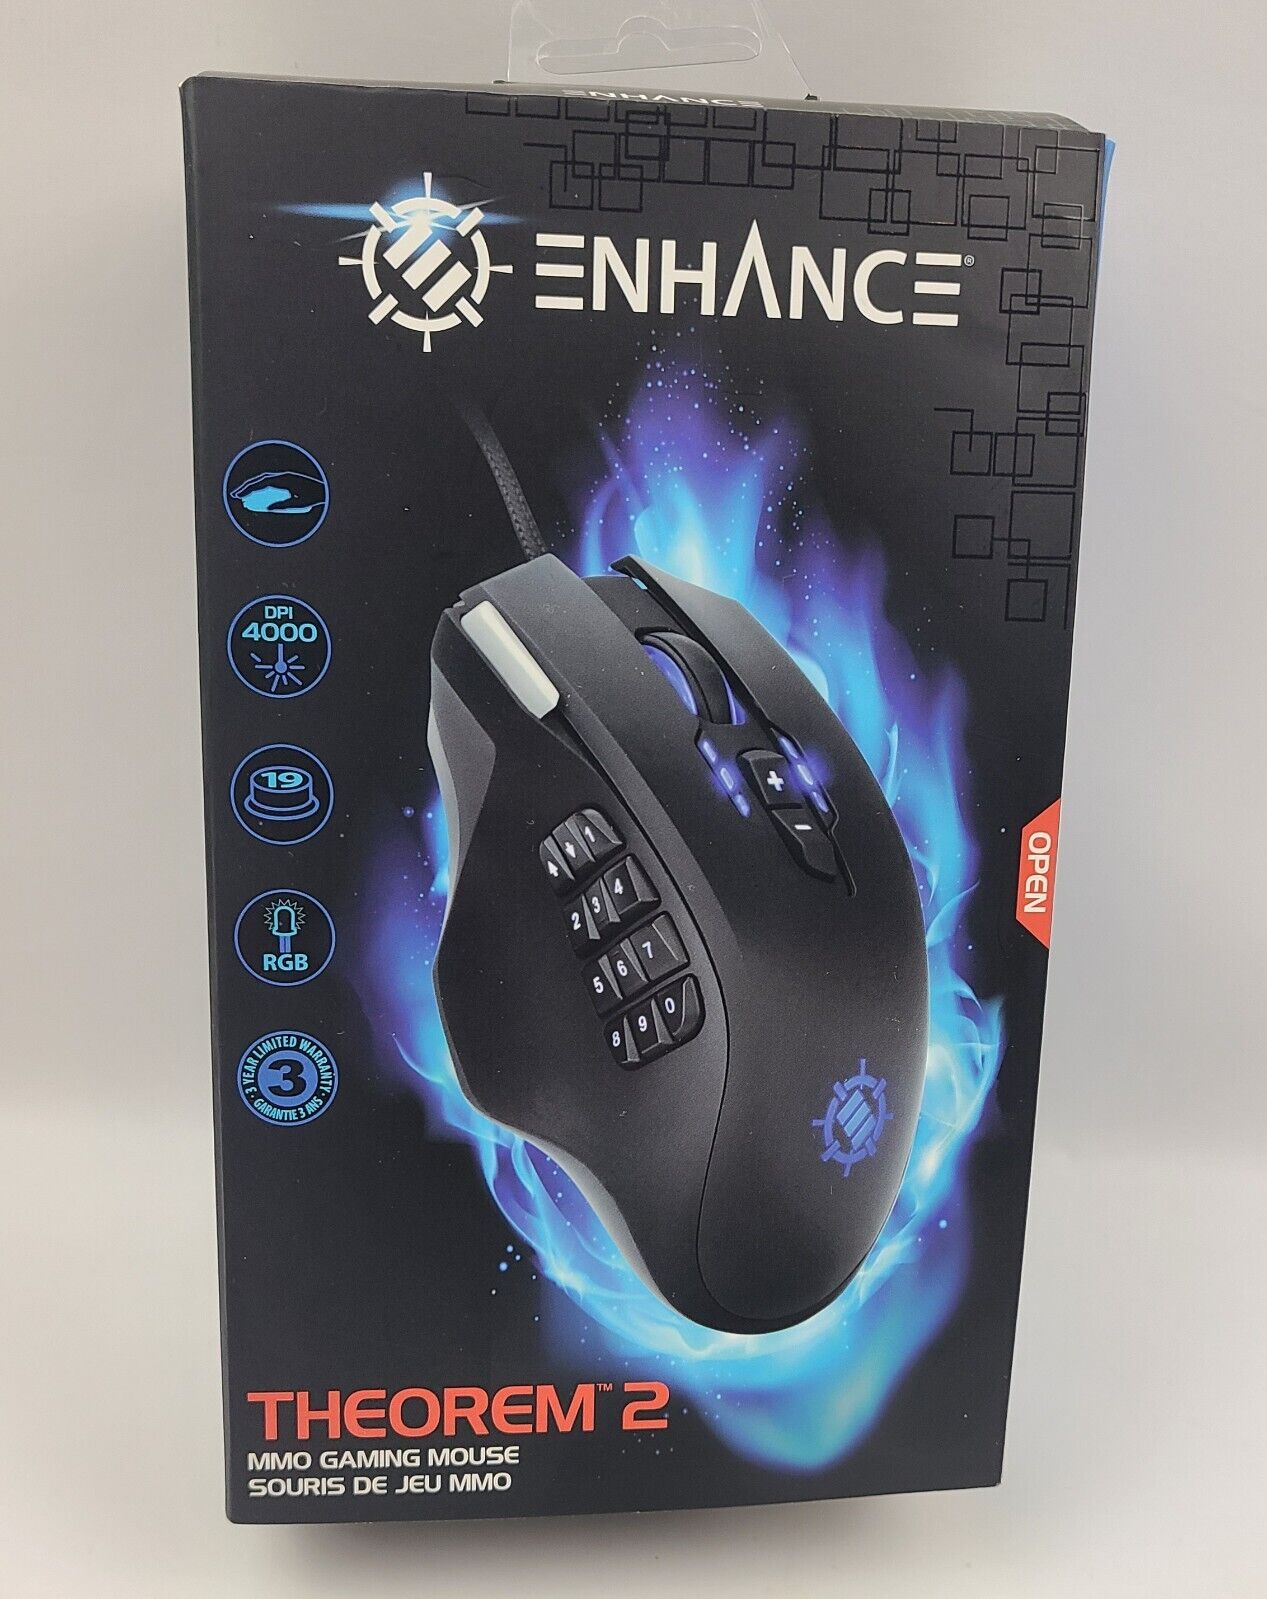 Gaming Mouse ENHANCE Theorem 2 MMO with 13 Programmable Side Buttons - RGB Gamin